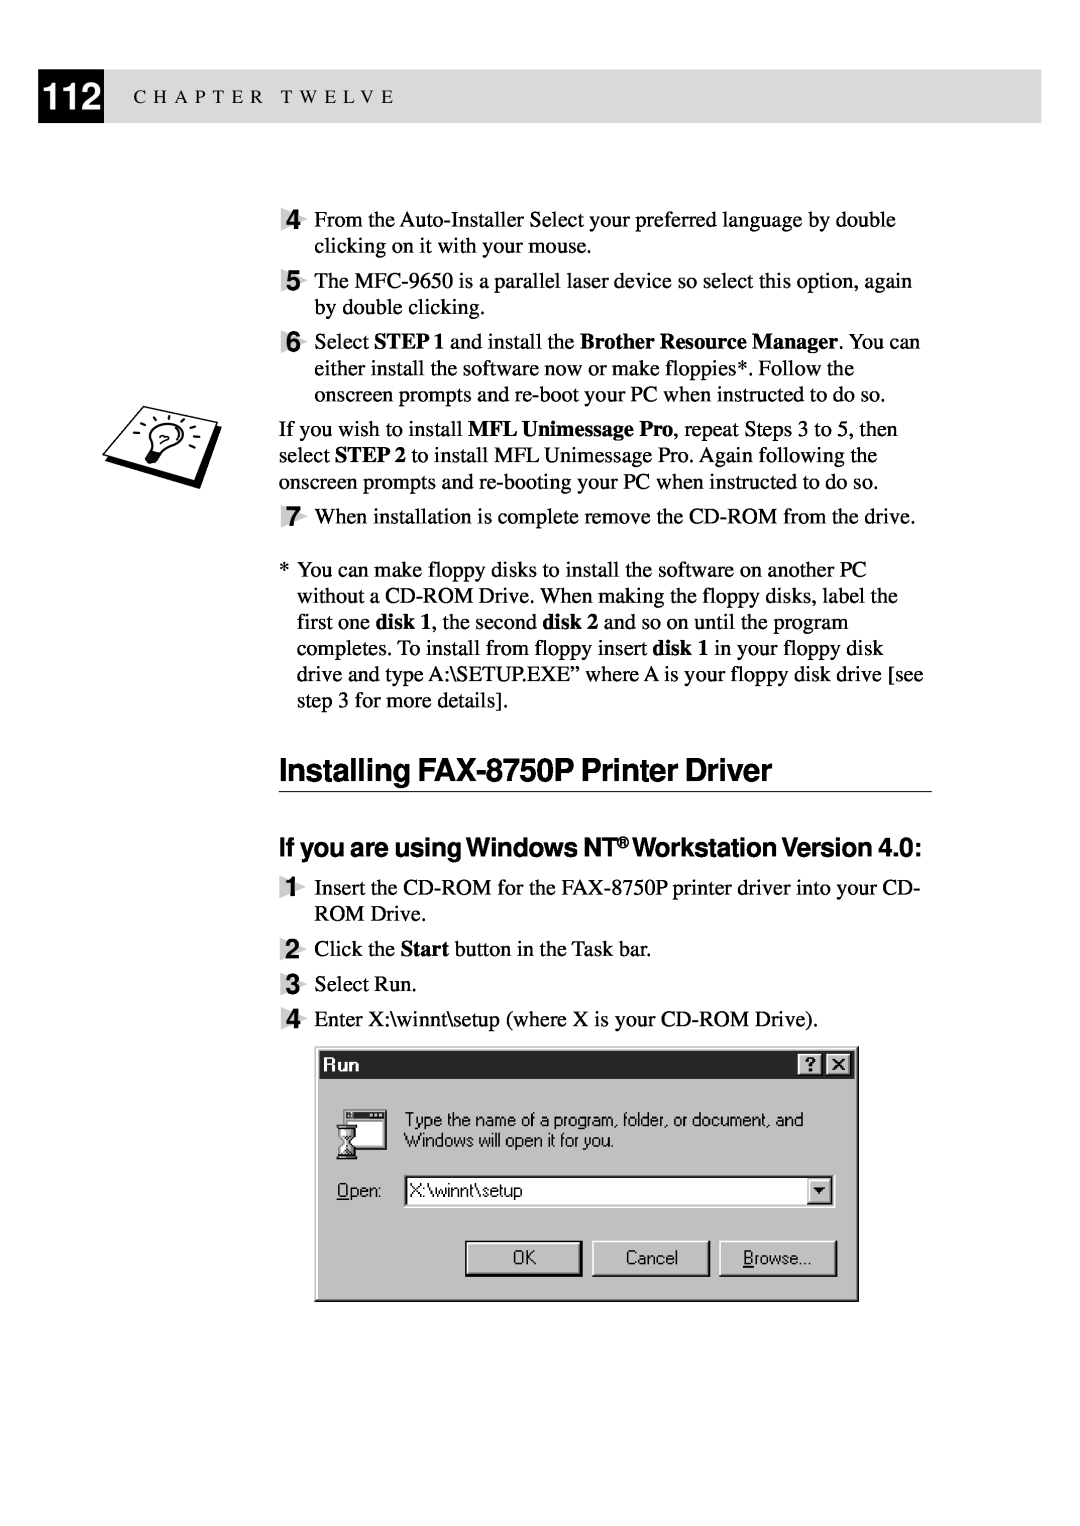 Brother FAX-8350P, MFC-9650 Installing FAX-8750P Printer Driver, If you are using Windows NT Workstation Version 